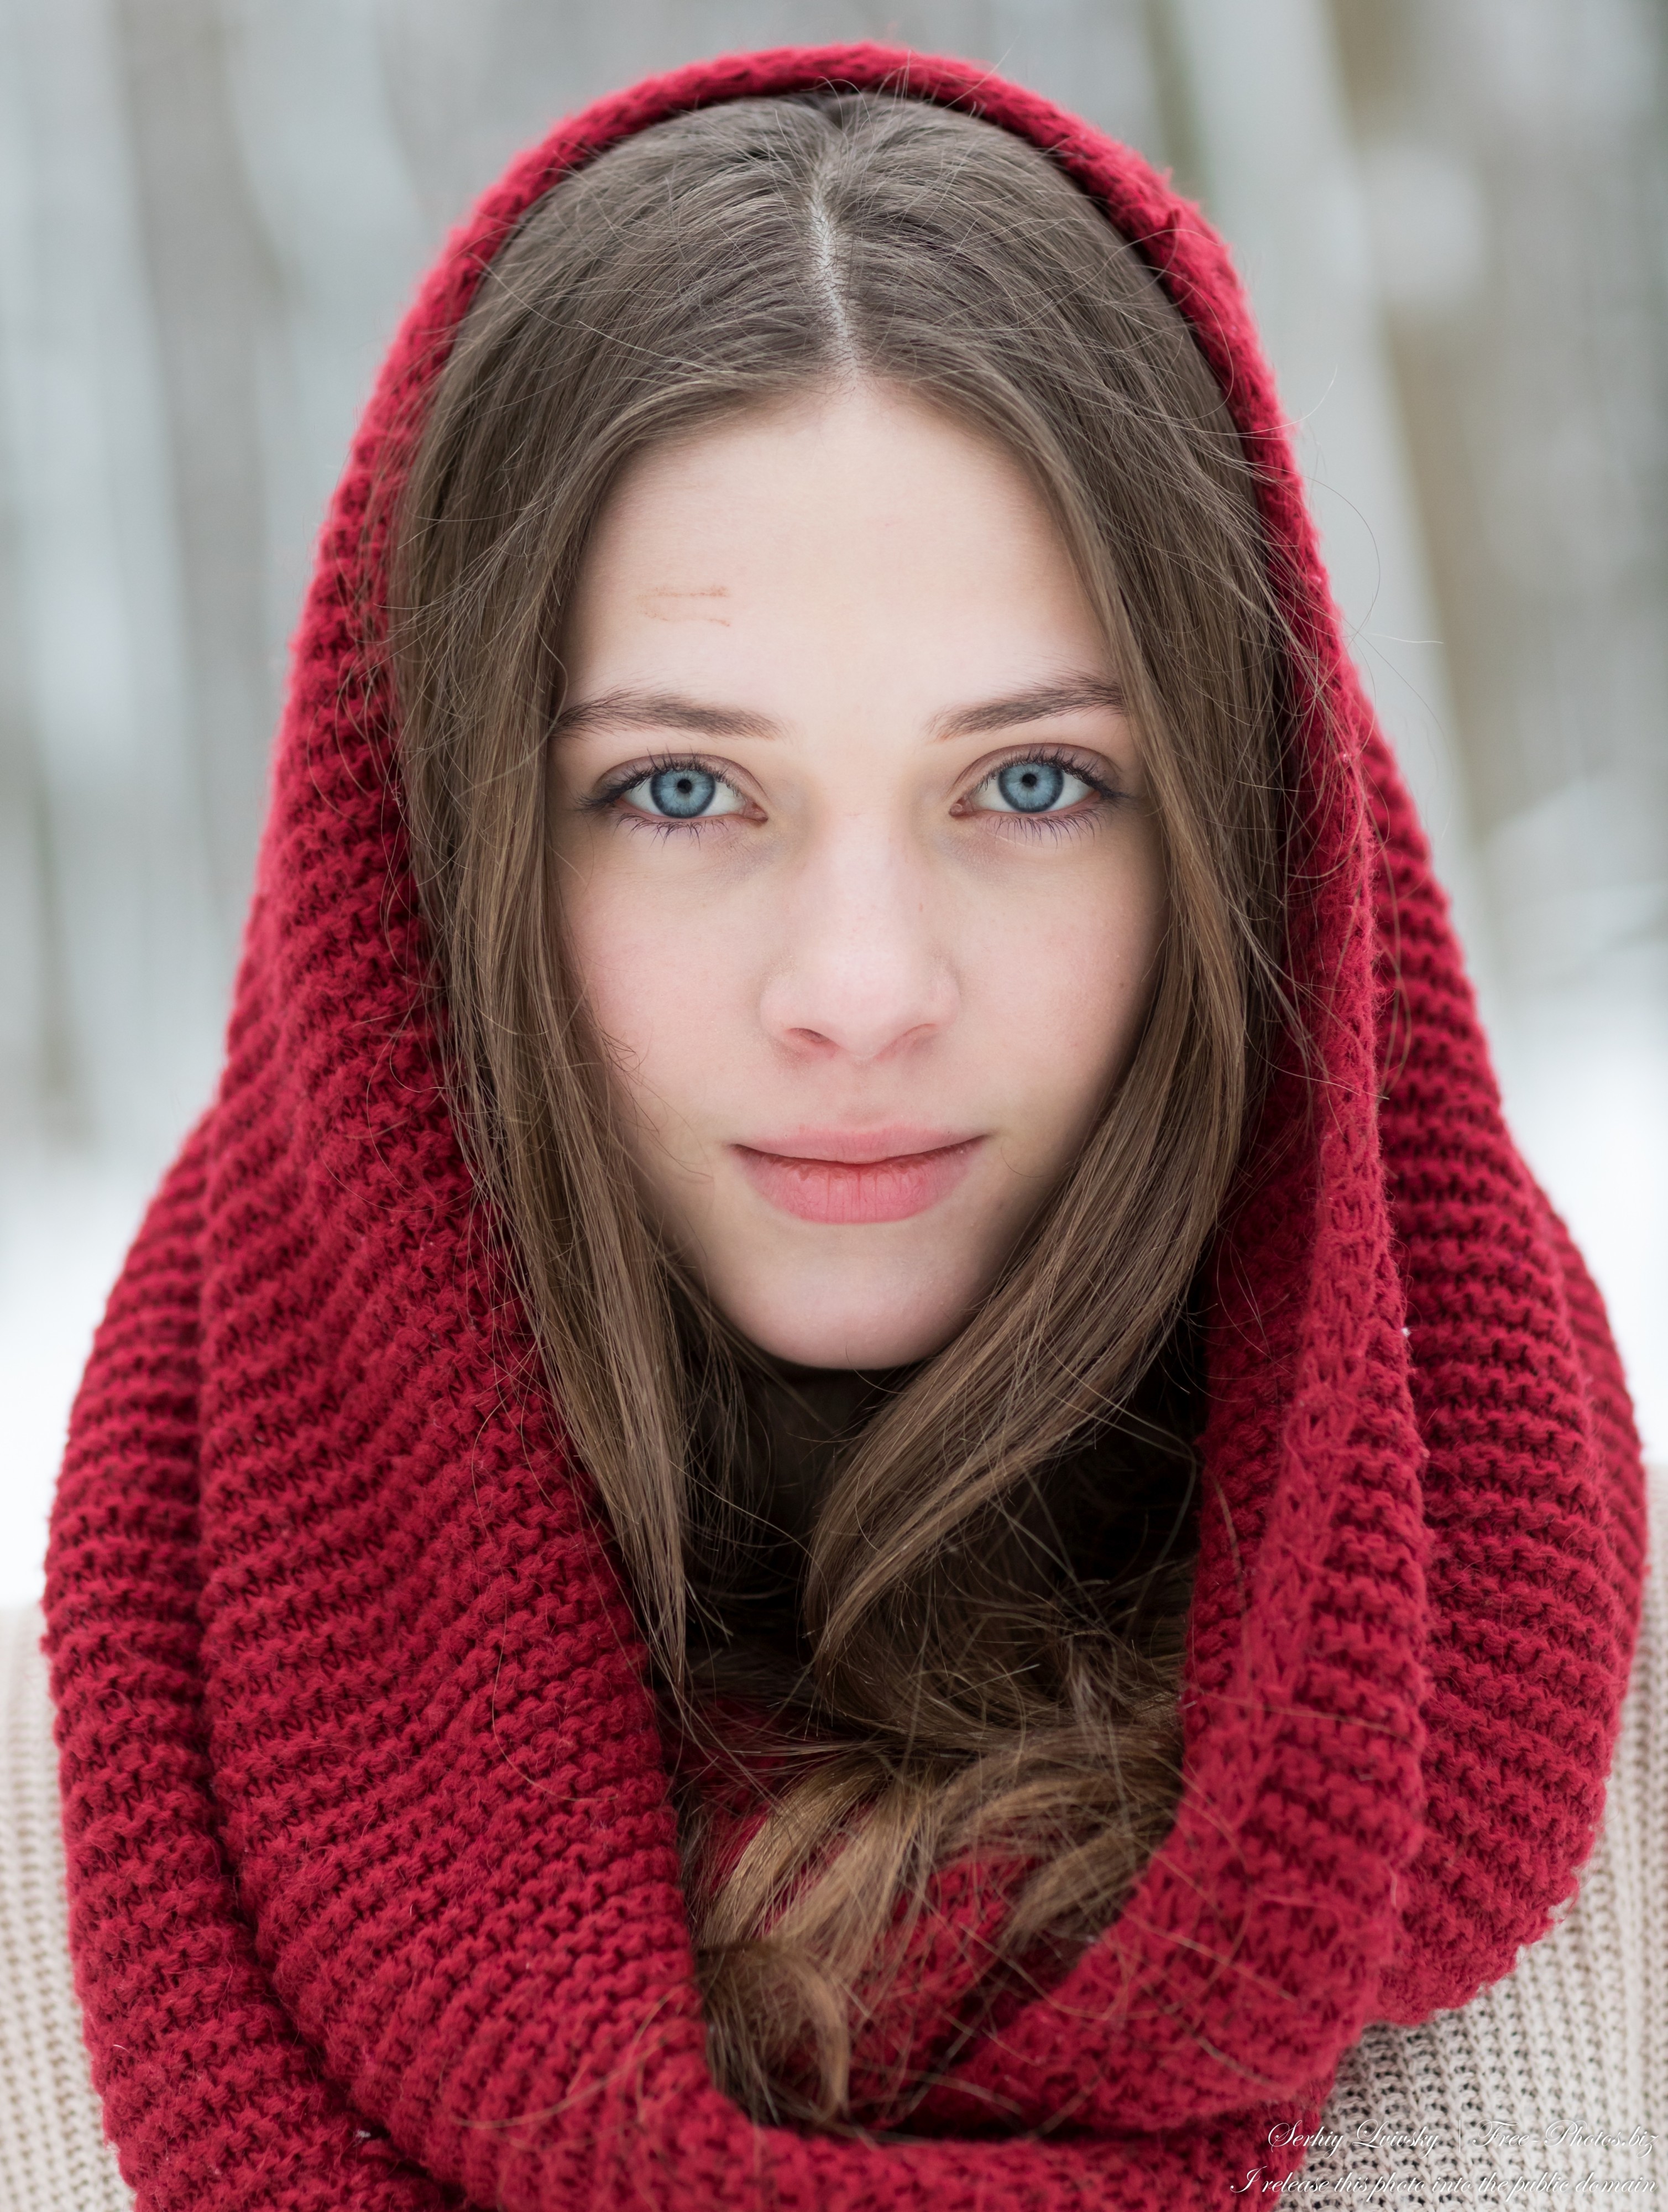 Sophia - a 17-year-old girl with blue eyes photographed by Serhiy Lvivsky in January 2022, picture 20